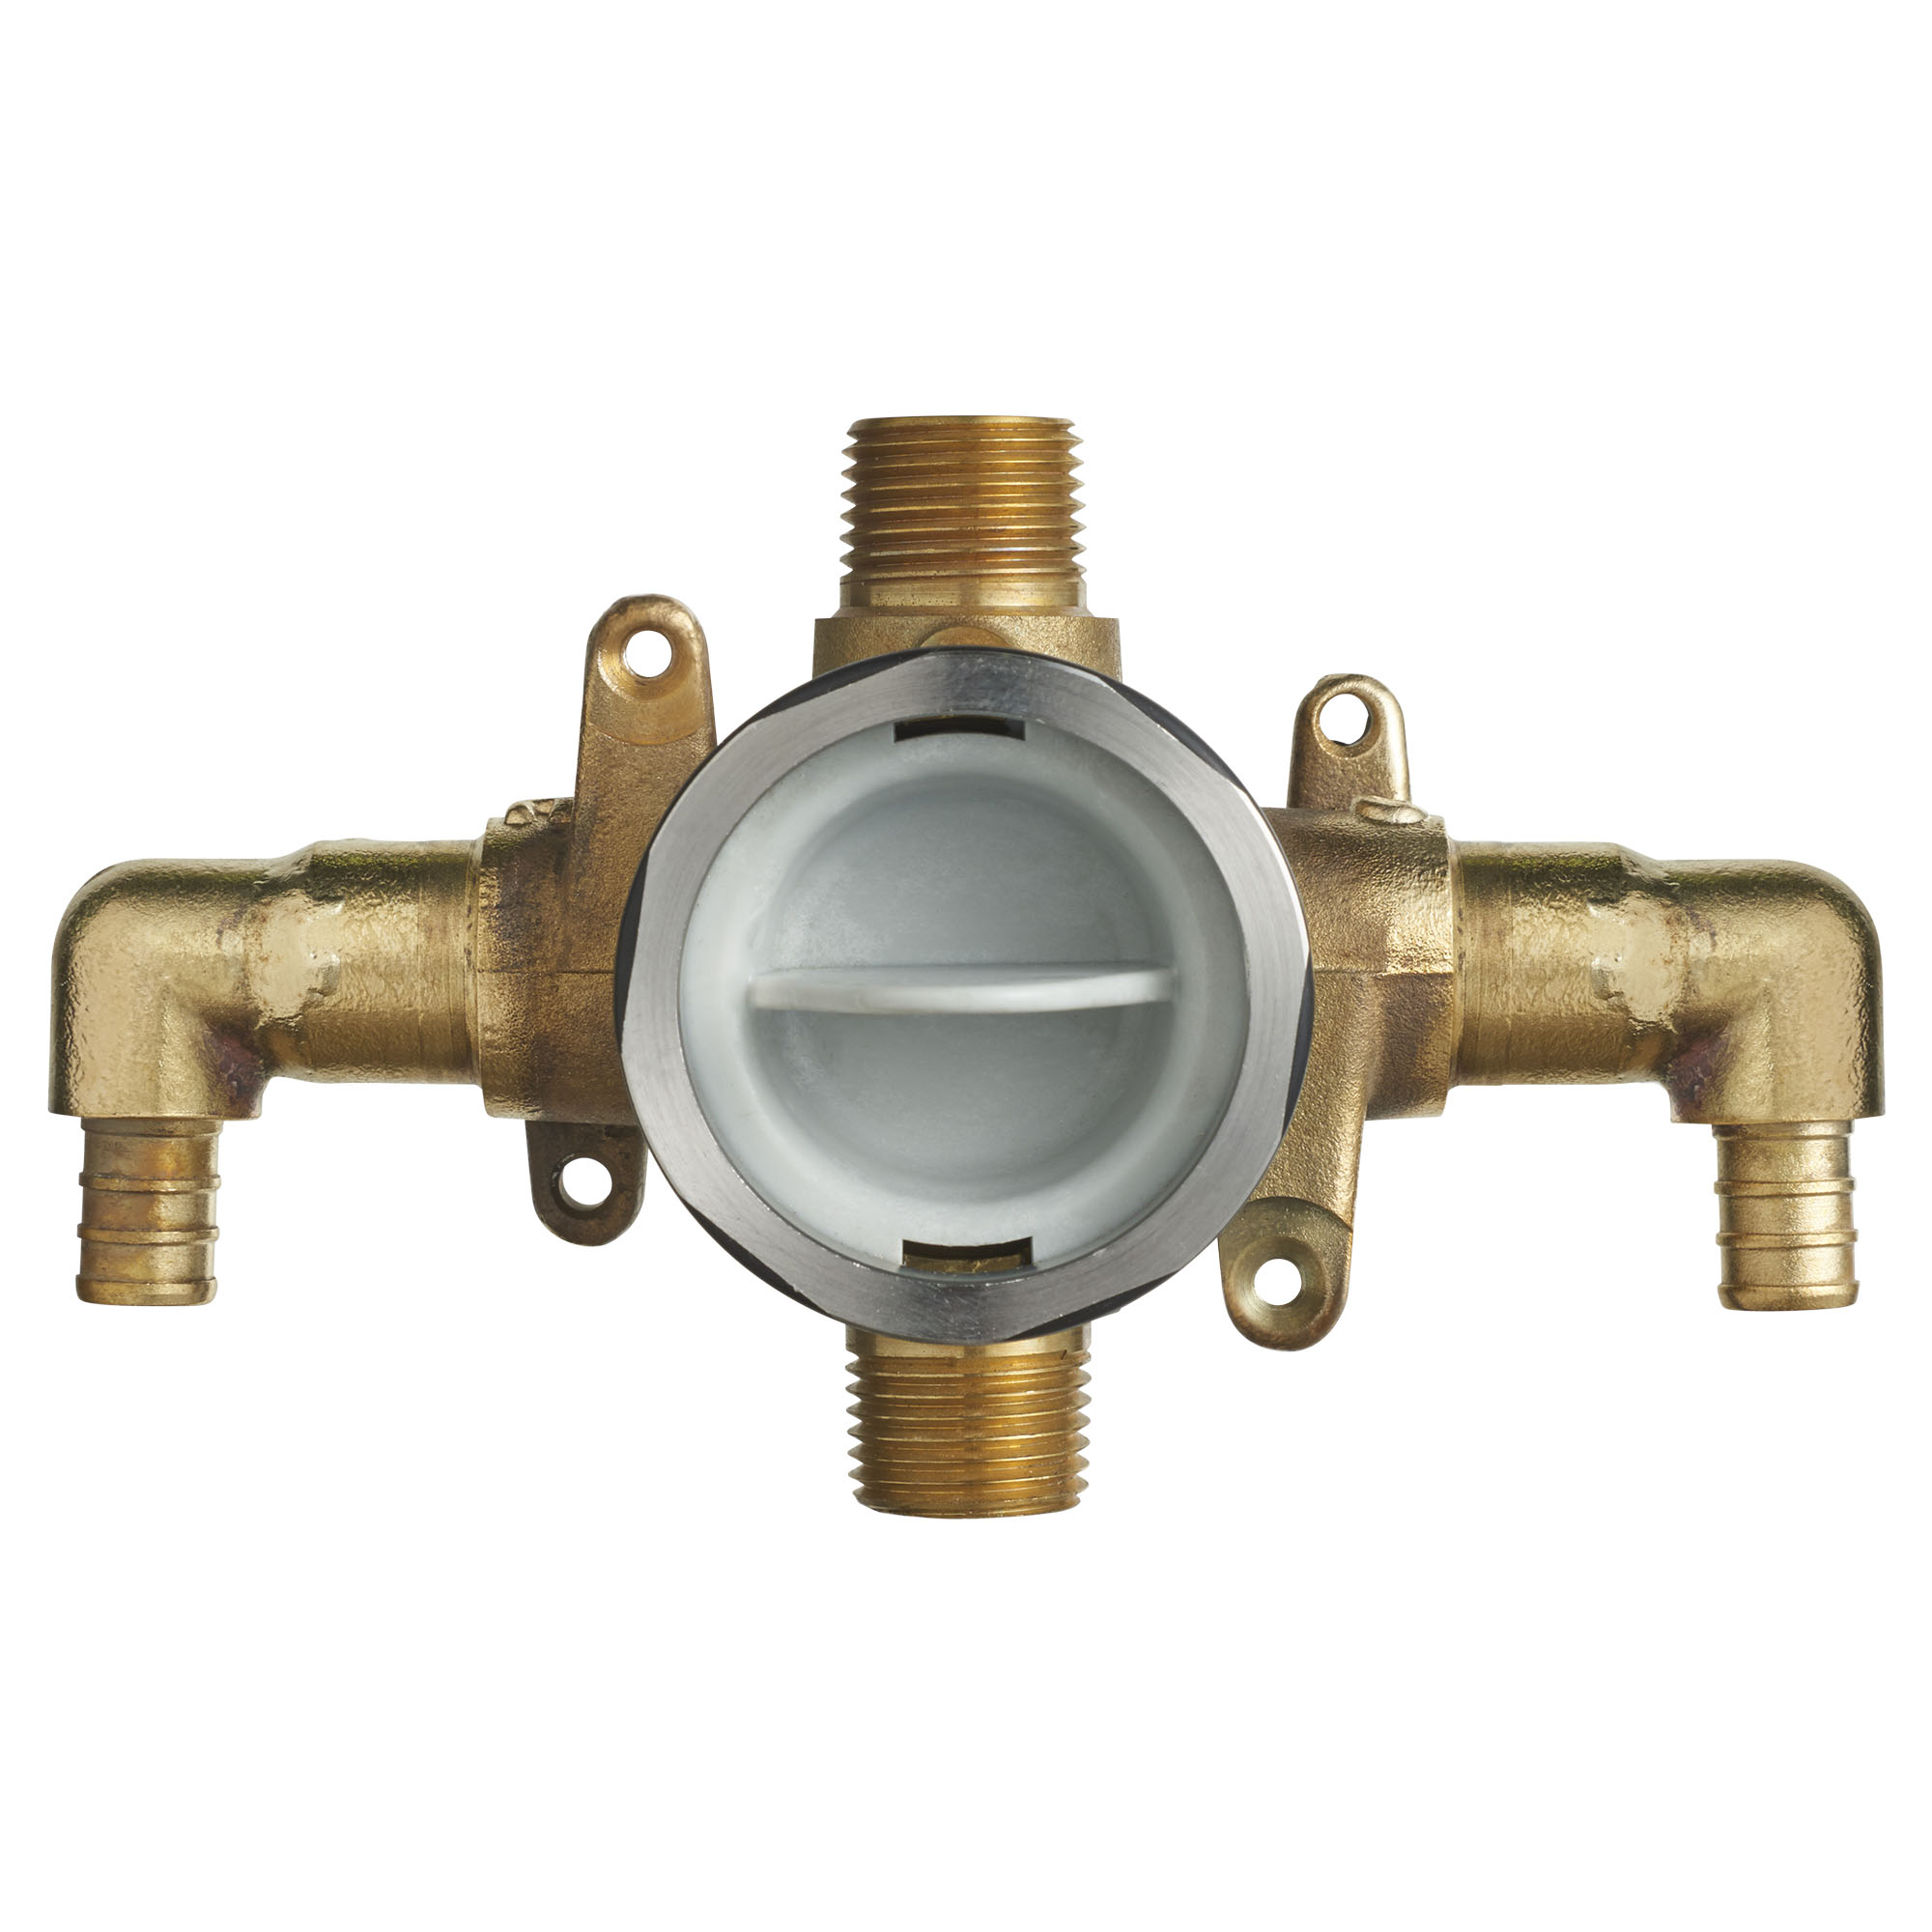 Flash™ Shower Rough-In Valve With PEX Inlet Elbows/Universal Outlets for Crimp Ring System